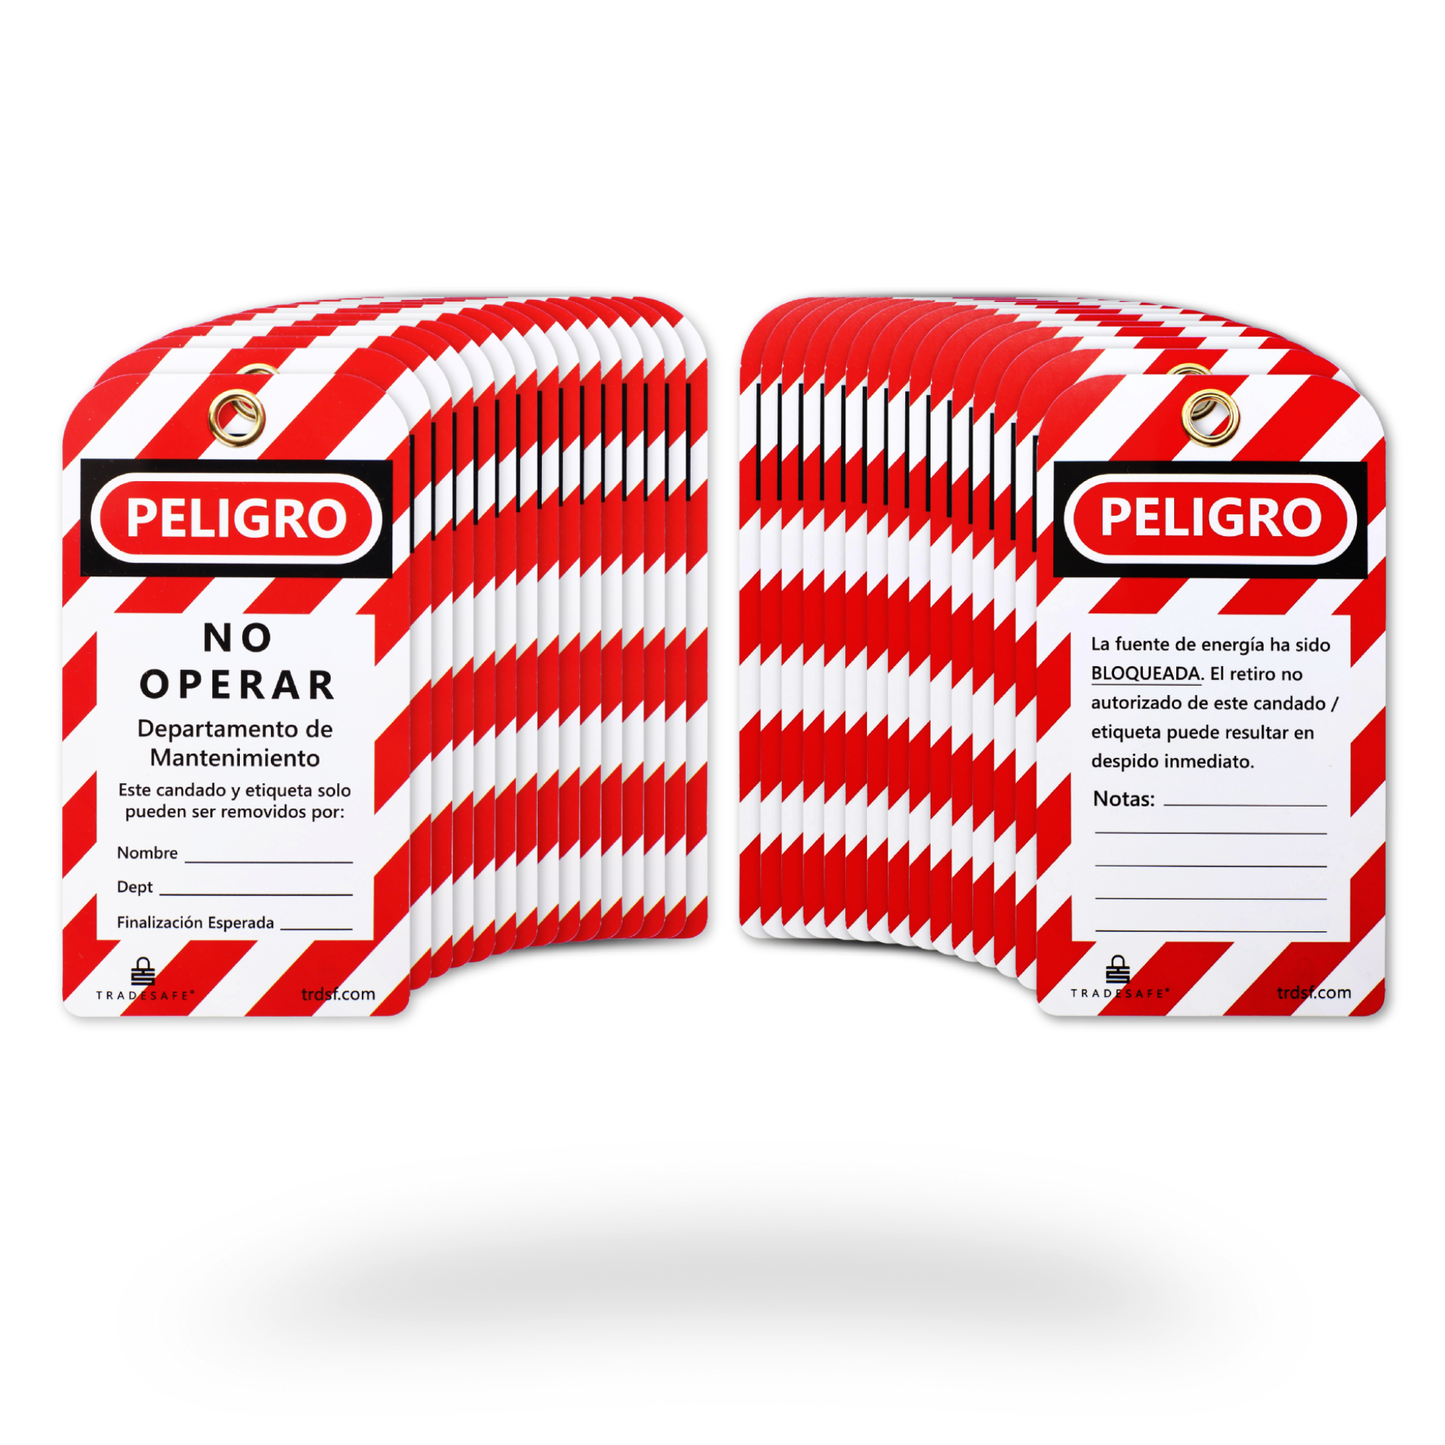 eye-level view of spanish peligro tags in 30 pack showing its front and back tags